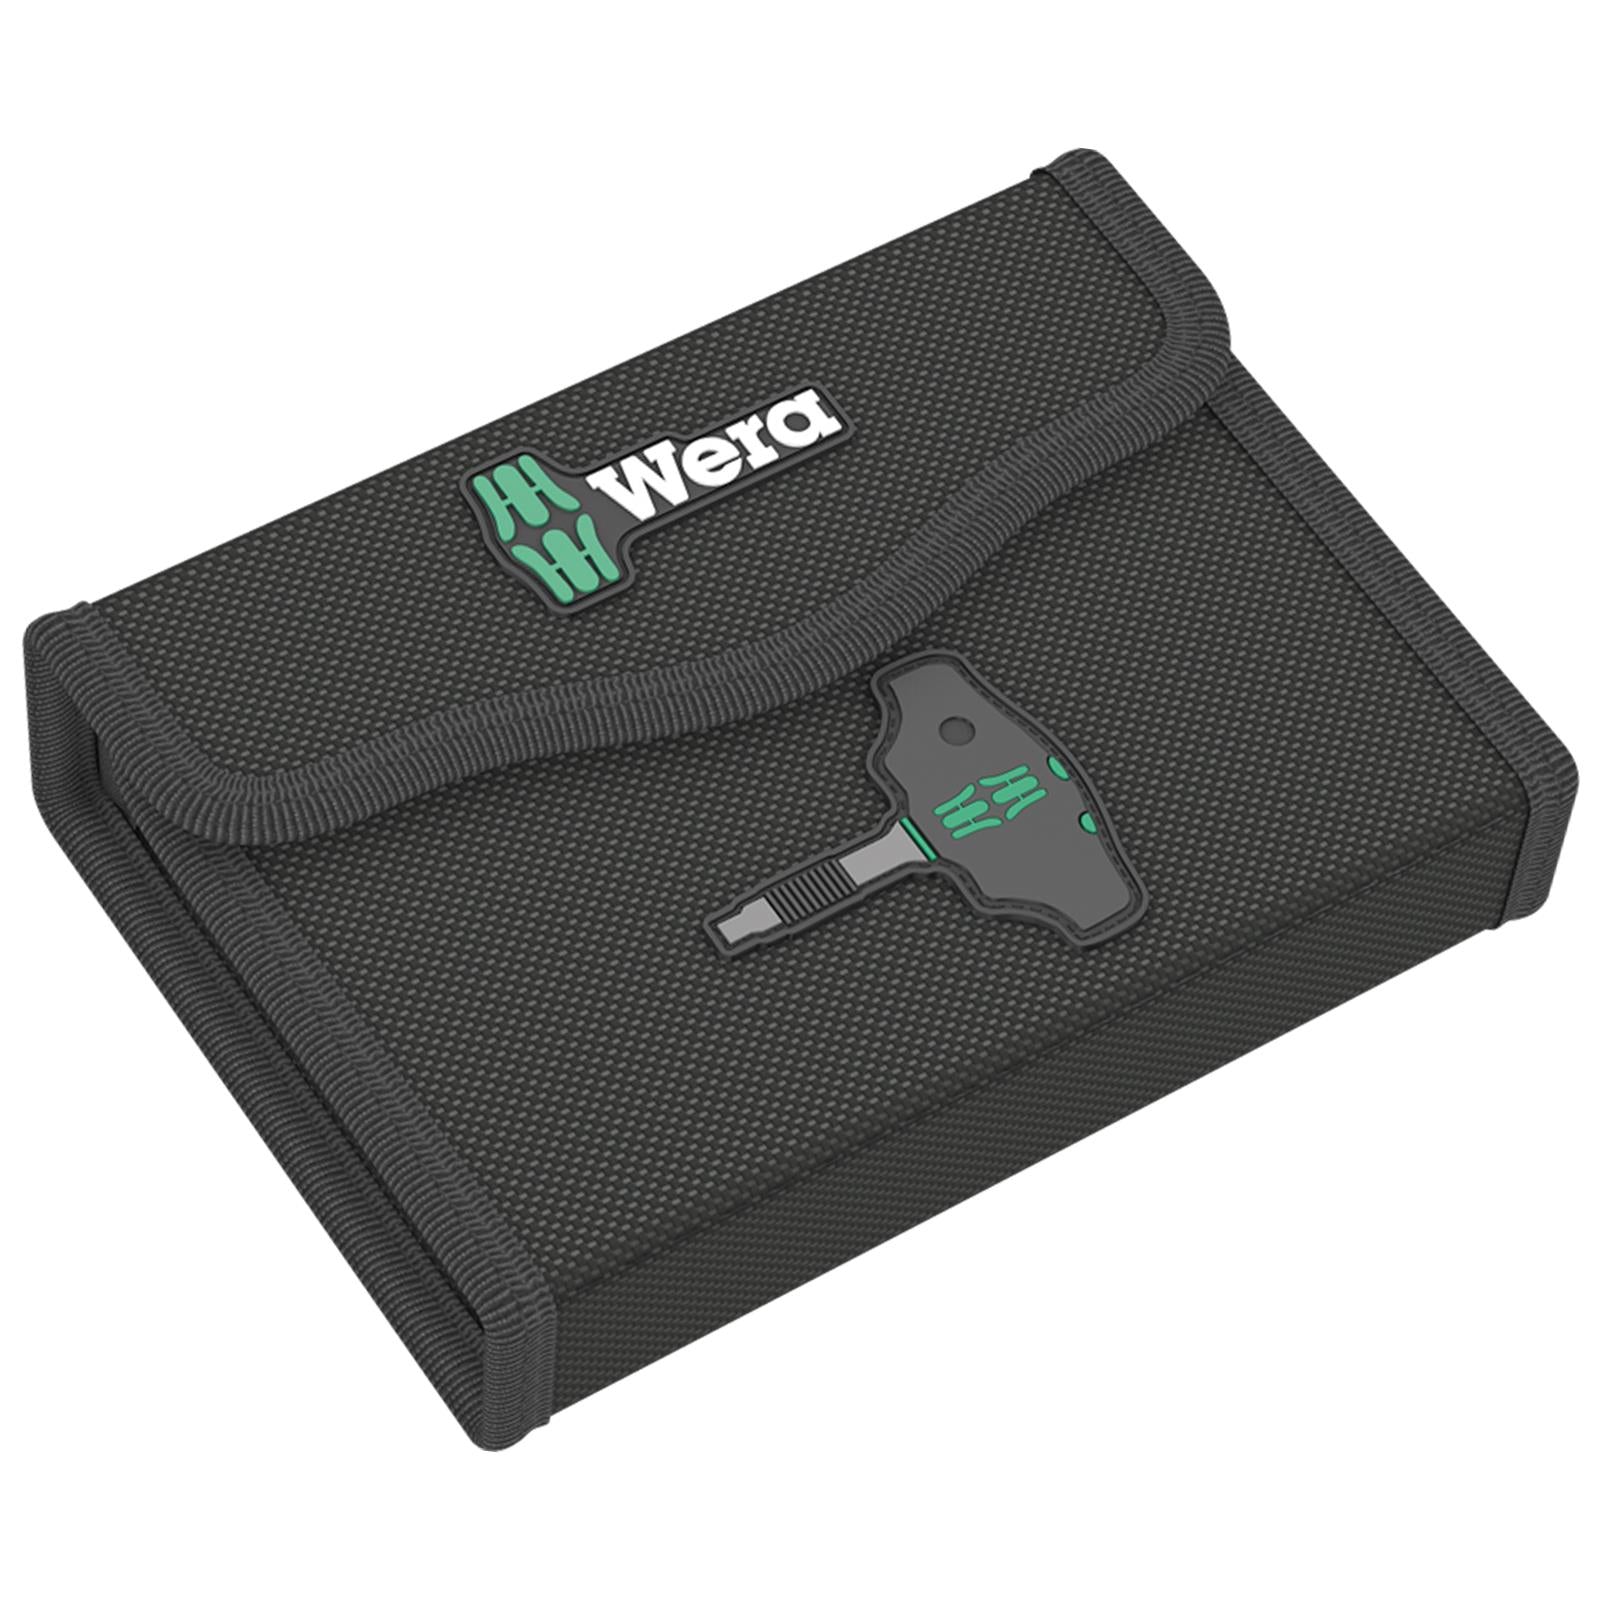 Wera T-Handle Adaptor Screwdriver 1/4" Drive with Ratchet Function 400 RA Set 2 9 Pieces 6-13mm Sockets